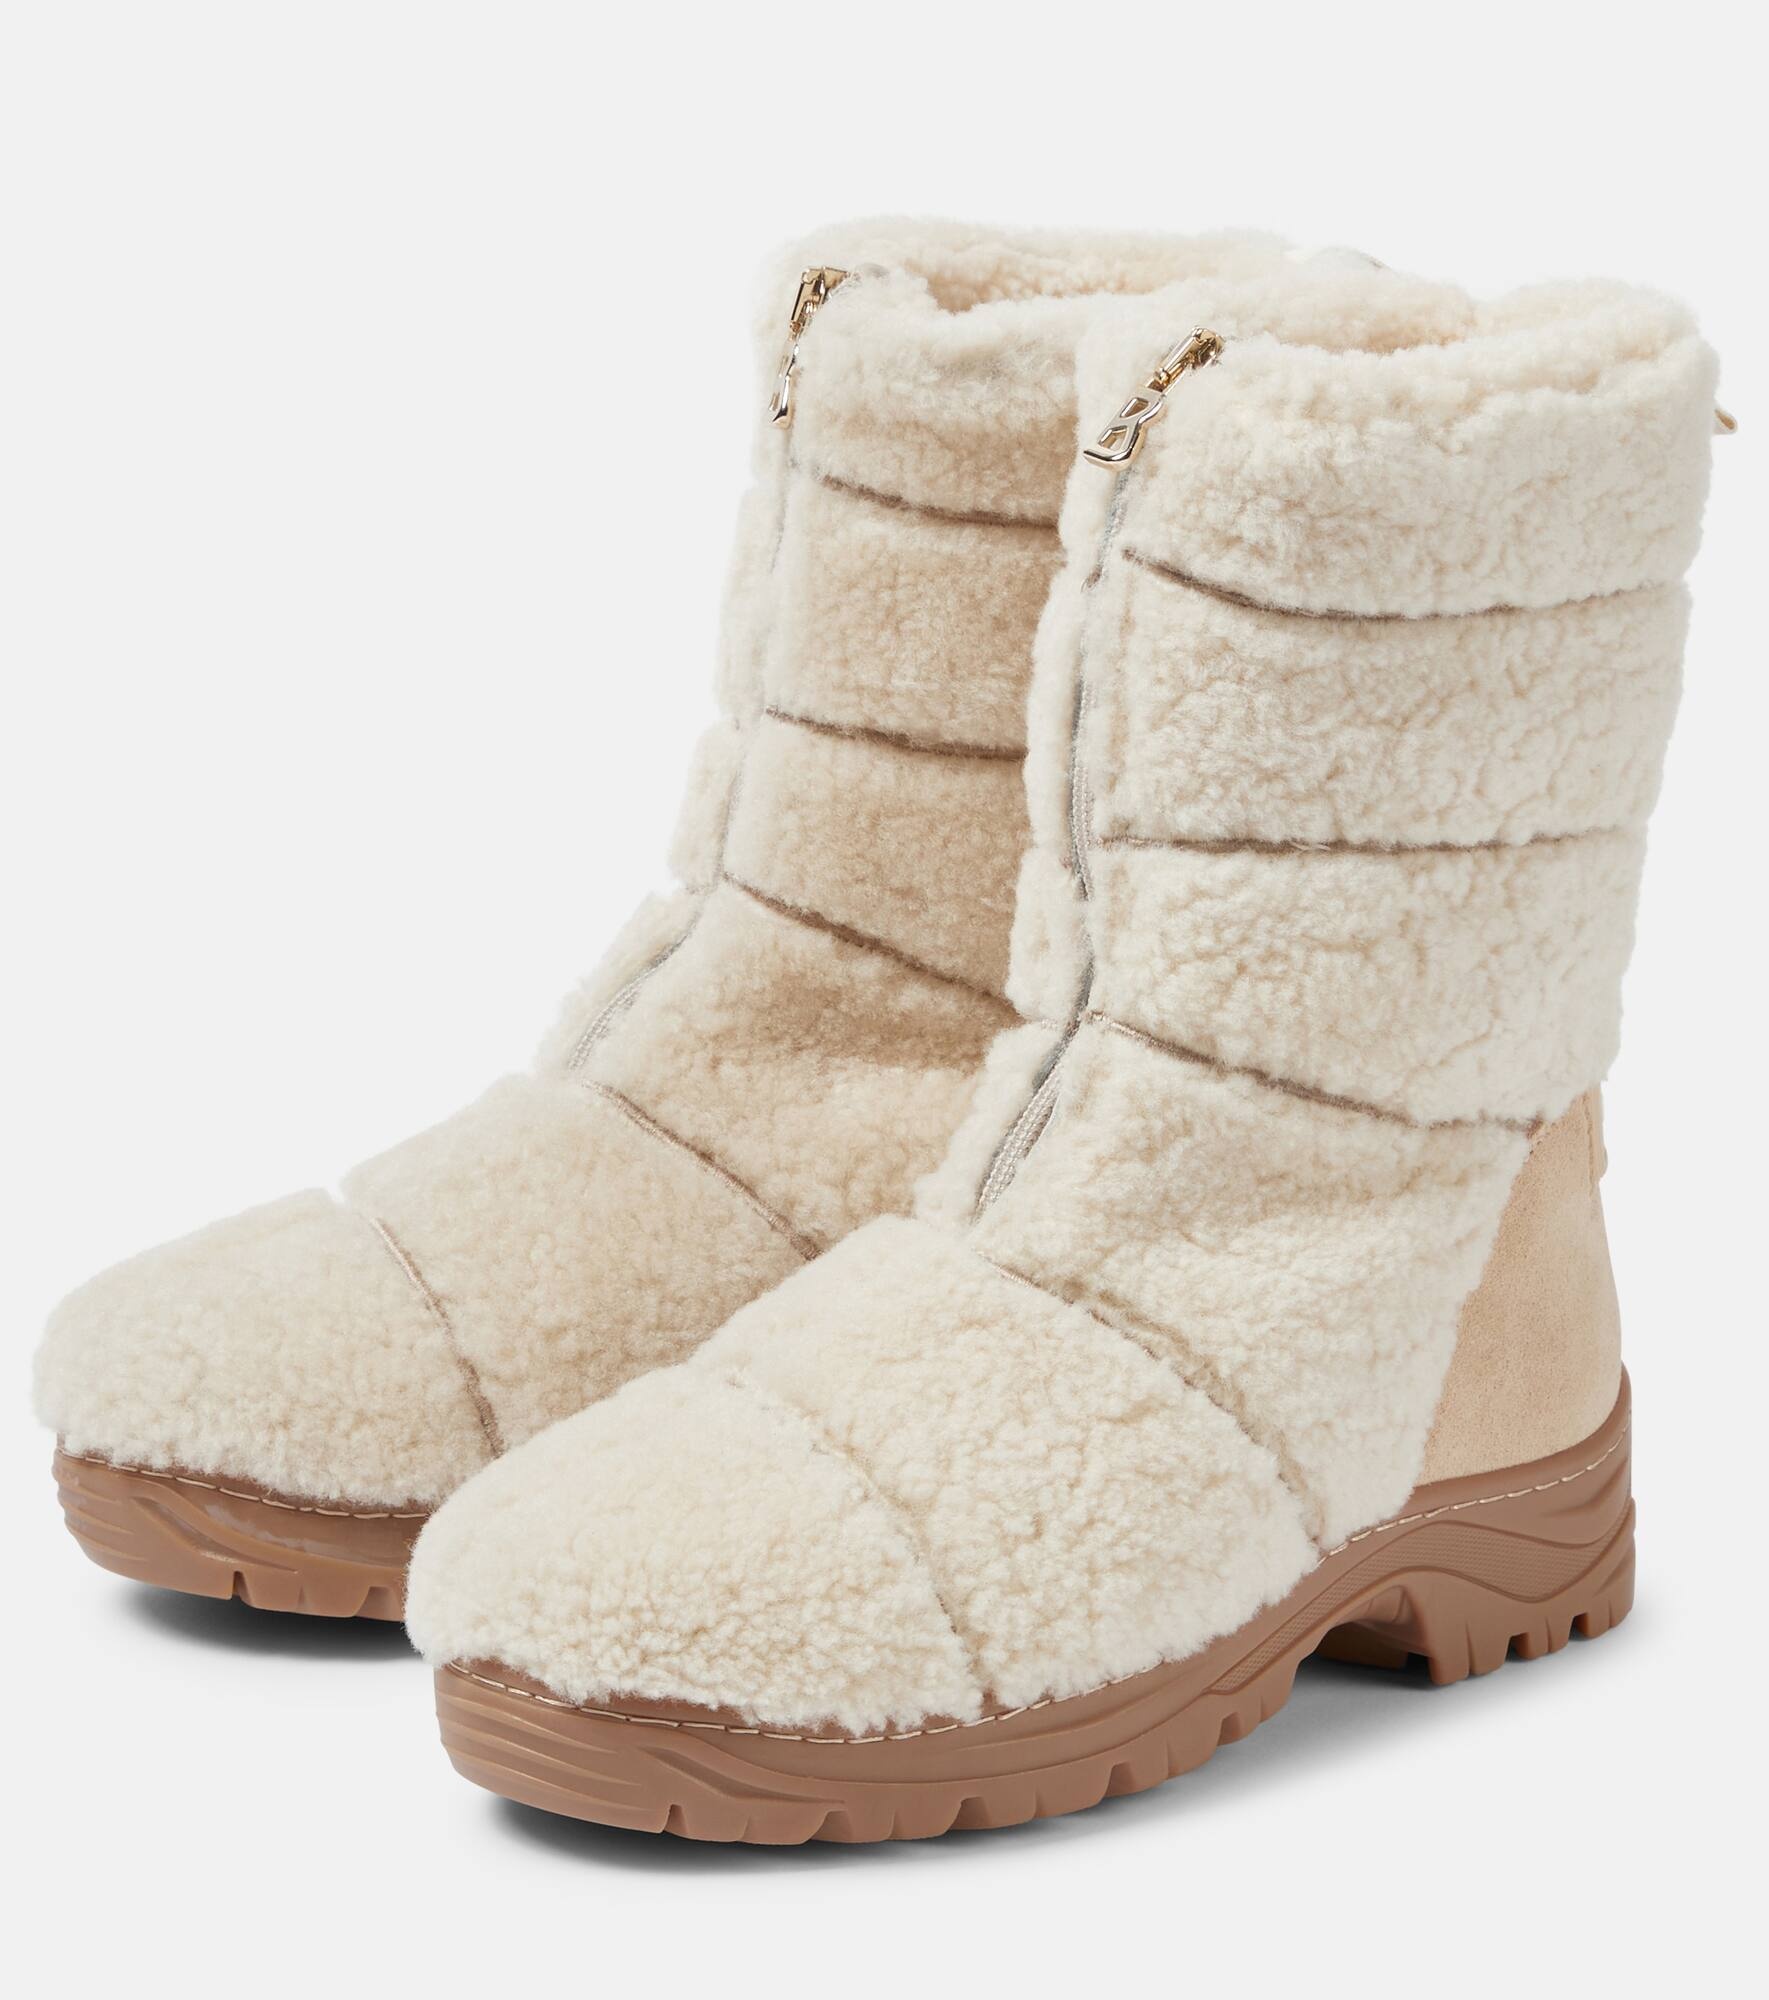 Alta Badia 6 shearling ankle boots - 5